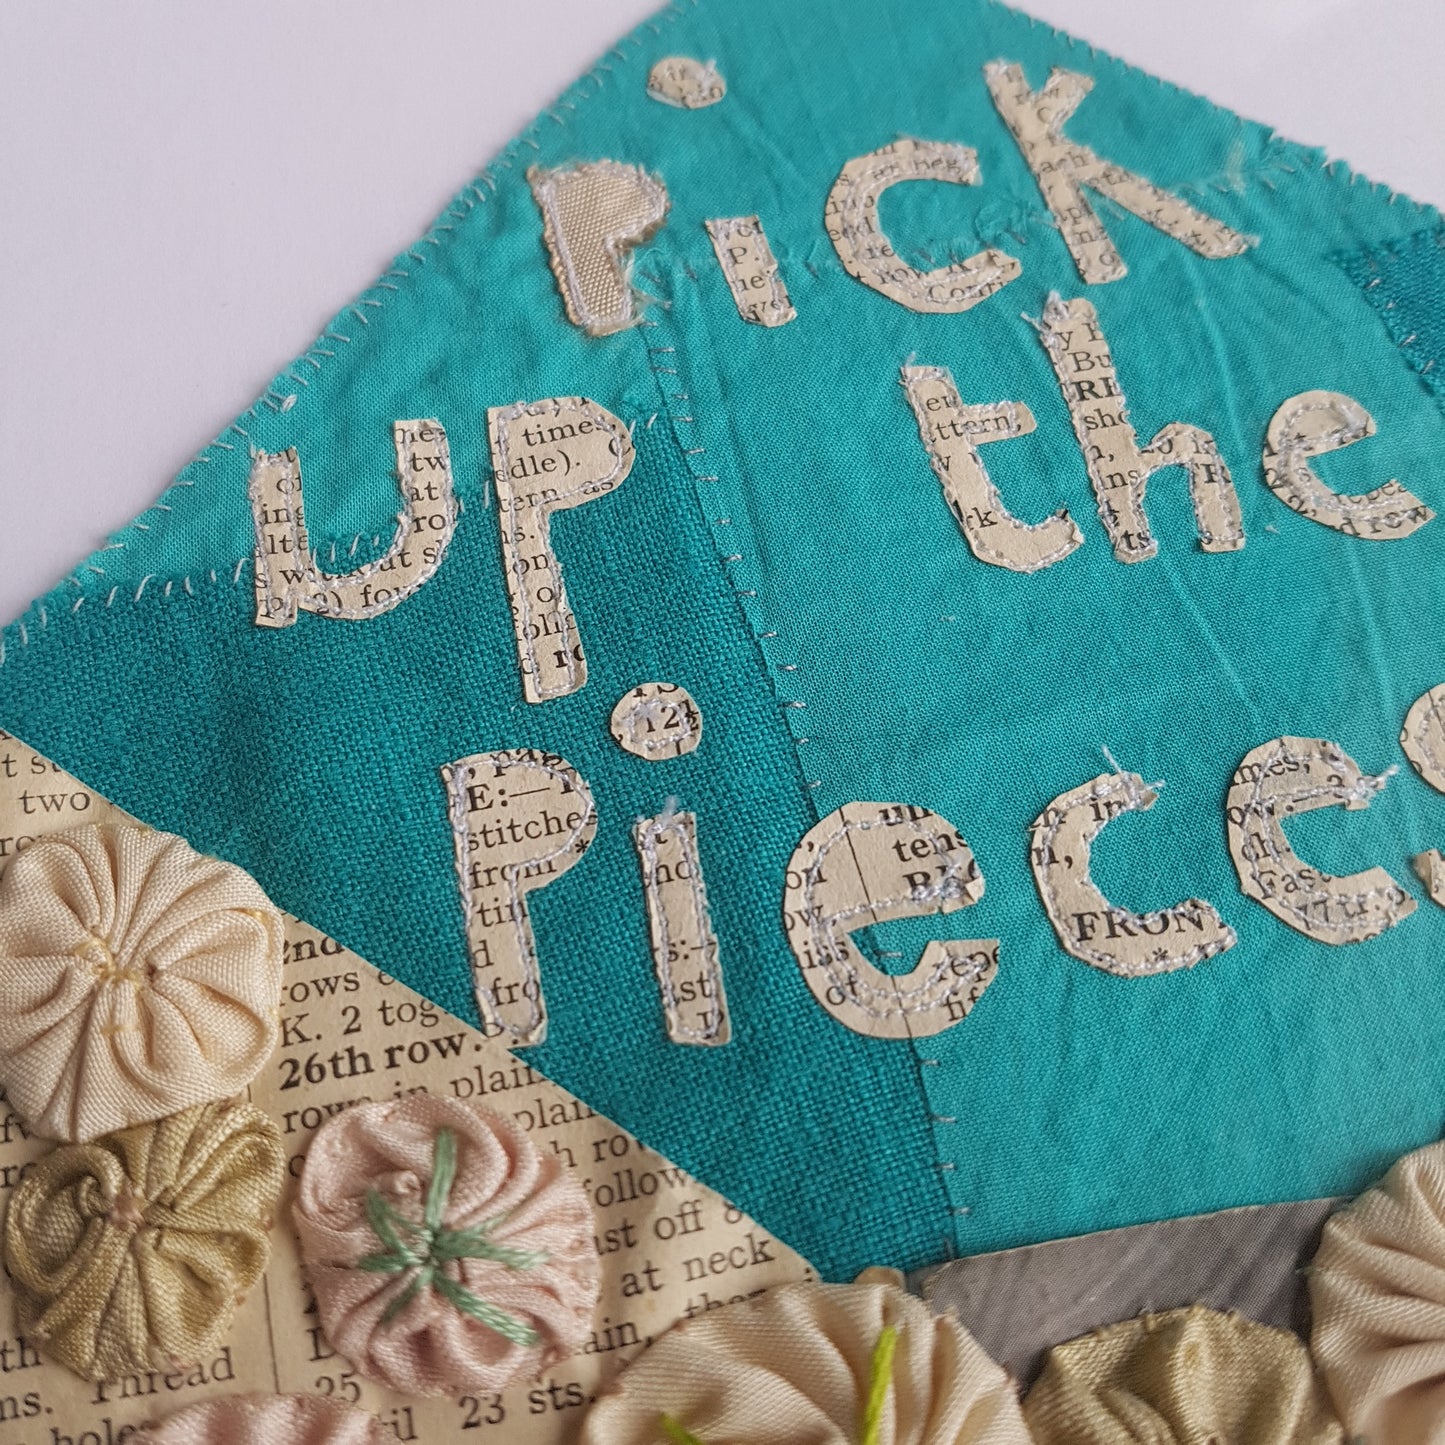 Textile Art Envelope With Hand Stitching - Pick Up The Pieces